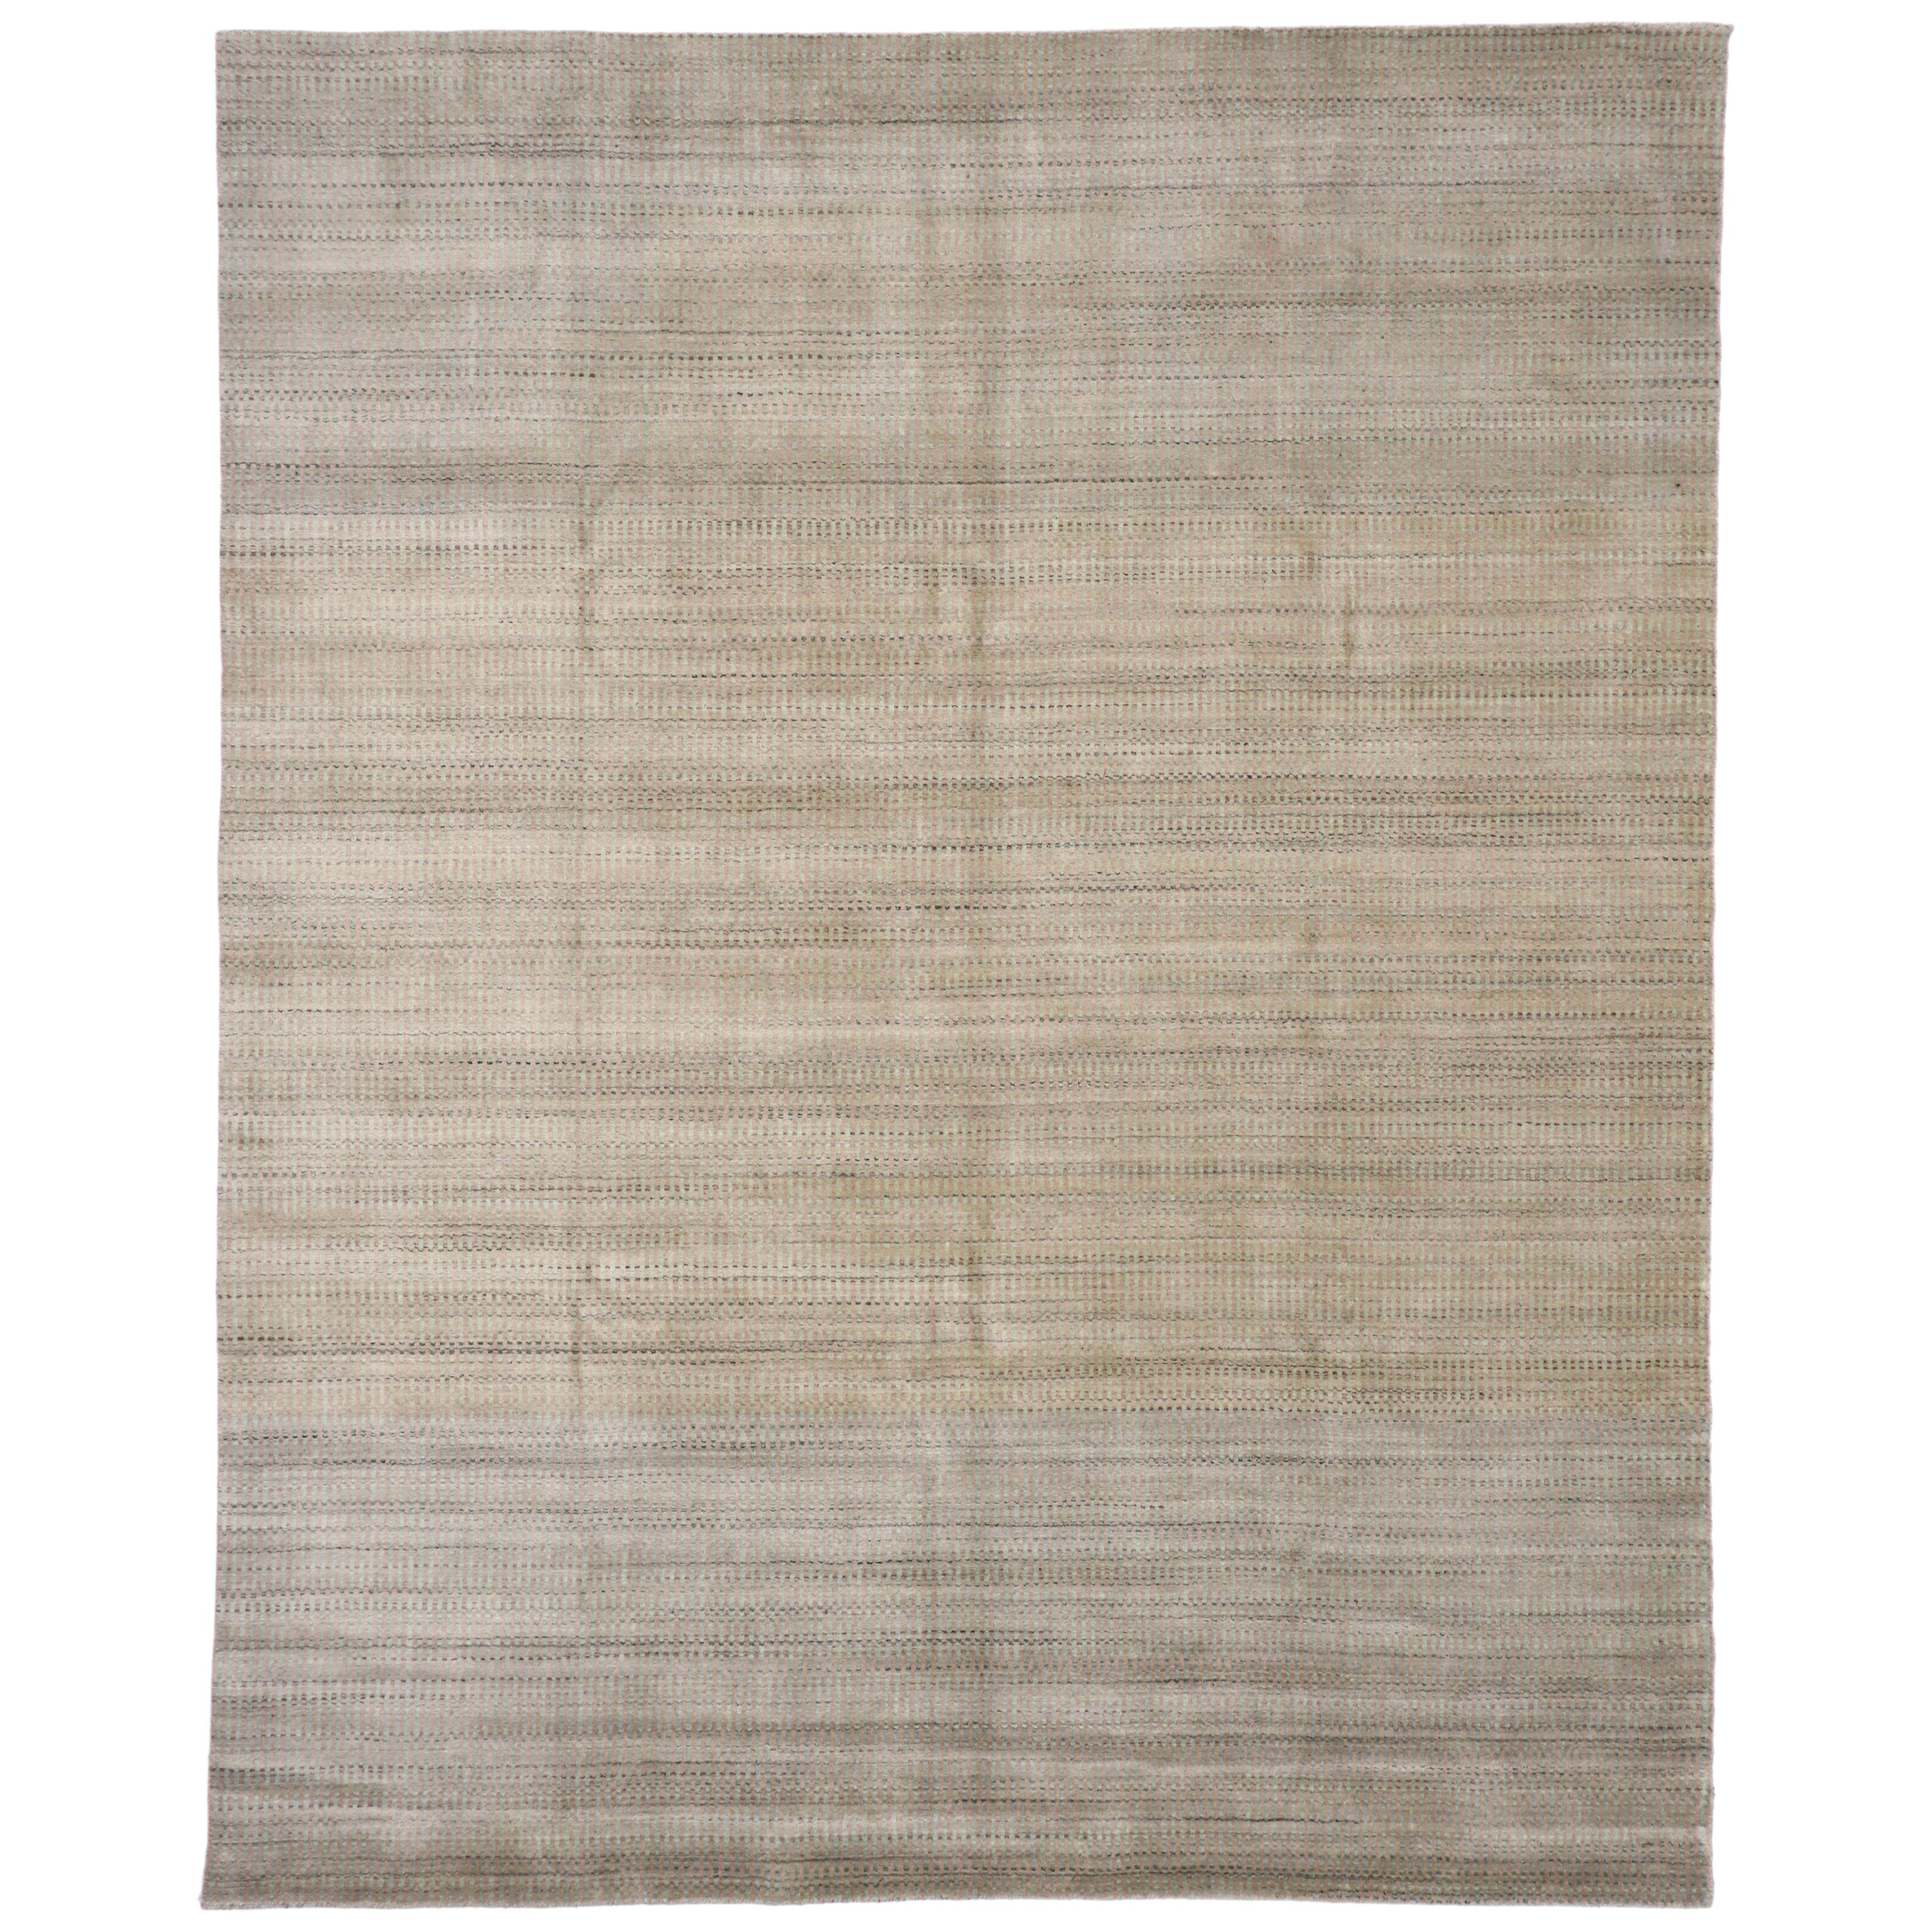 New Transitional Ombre Area Rug with French Country and Cottage Style